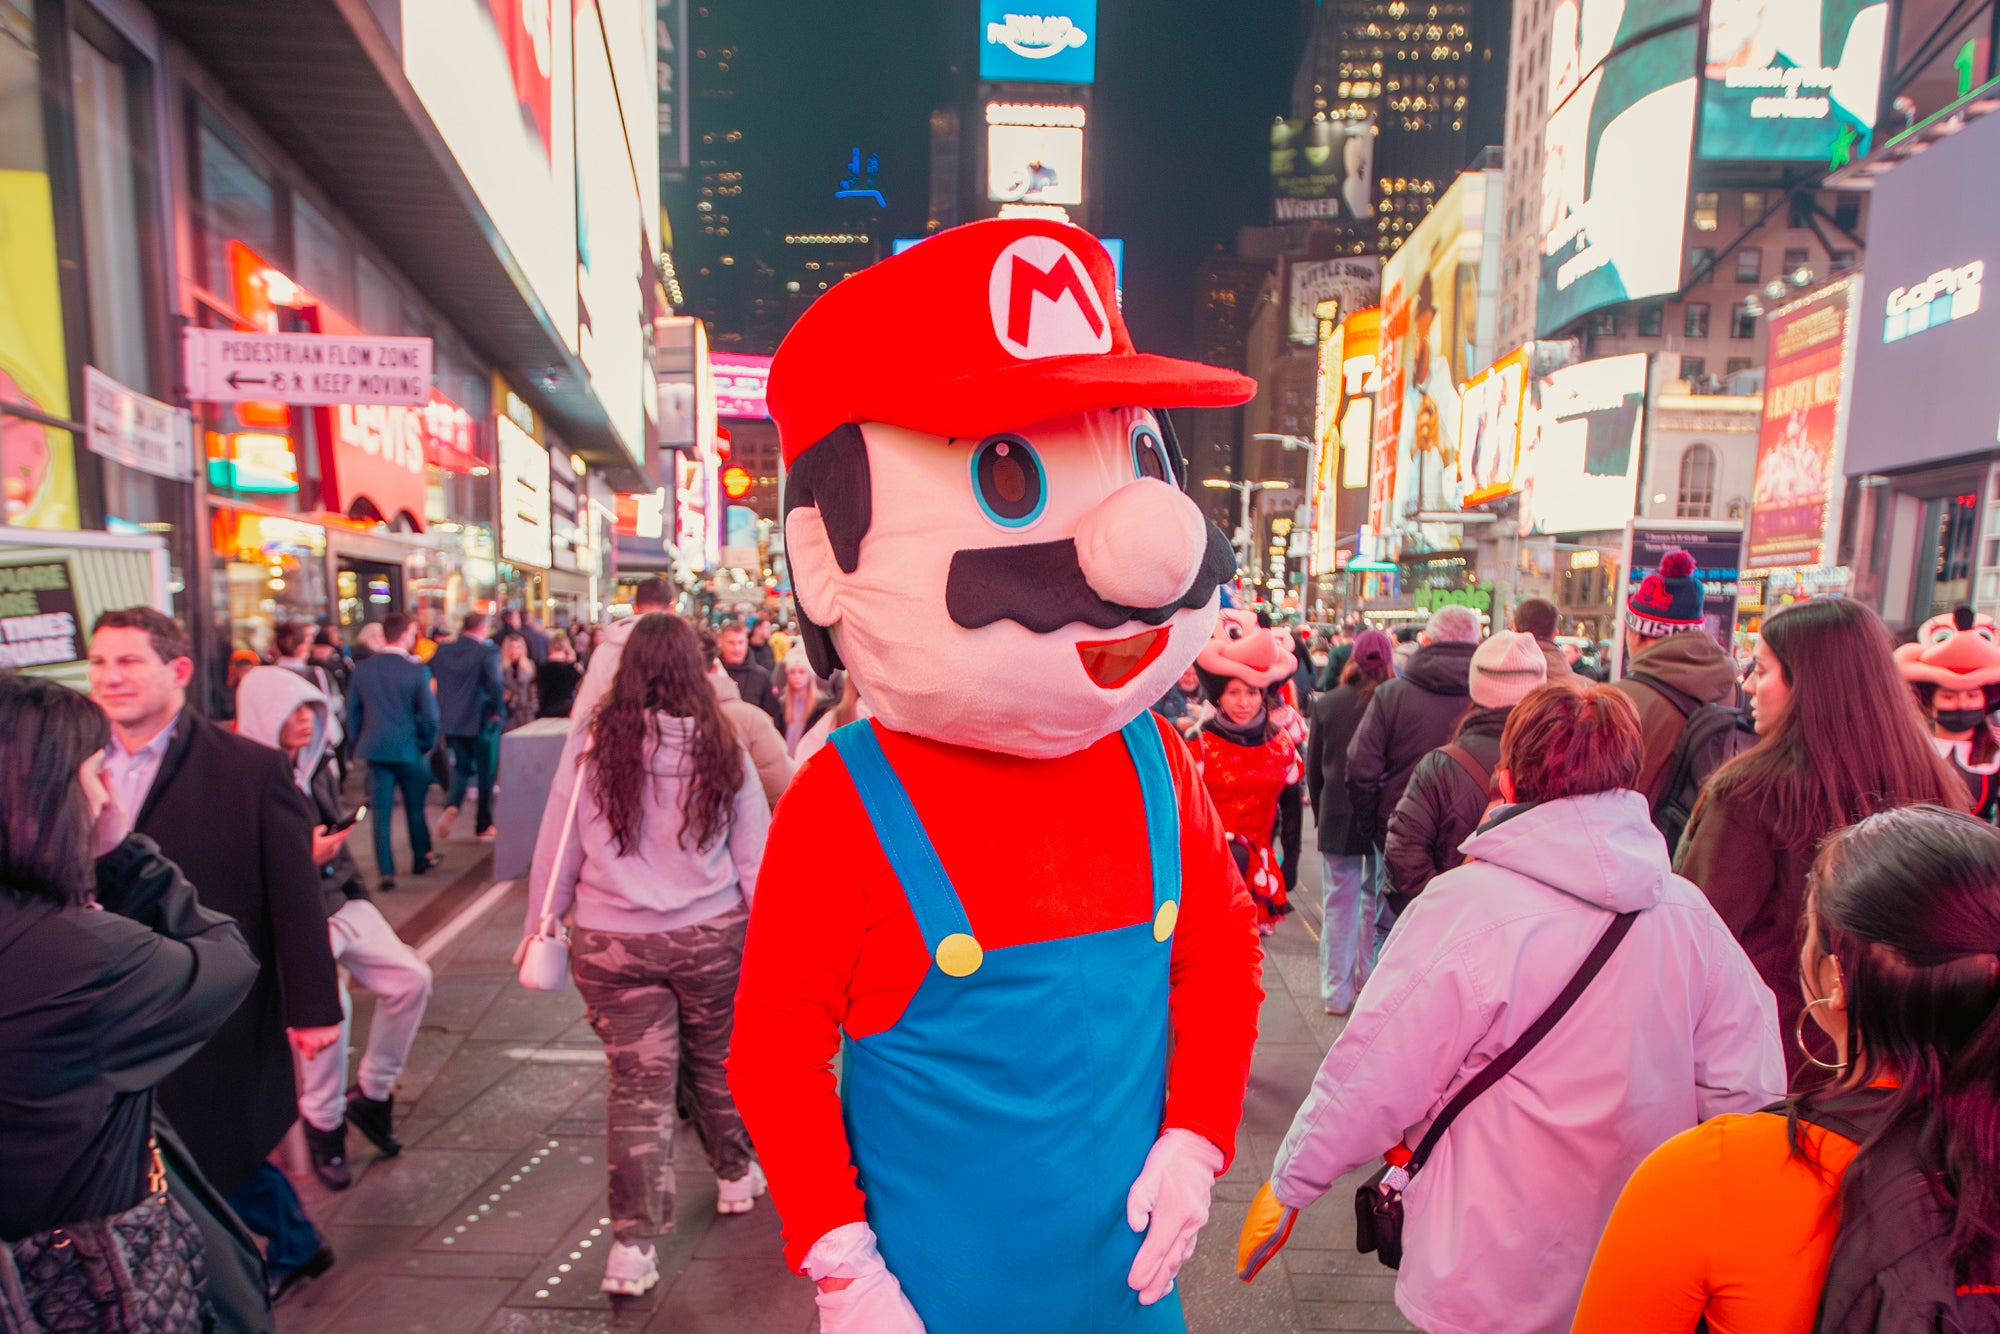 Luke, dressed as Mario, makes his way through the Times Square crowd.